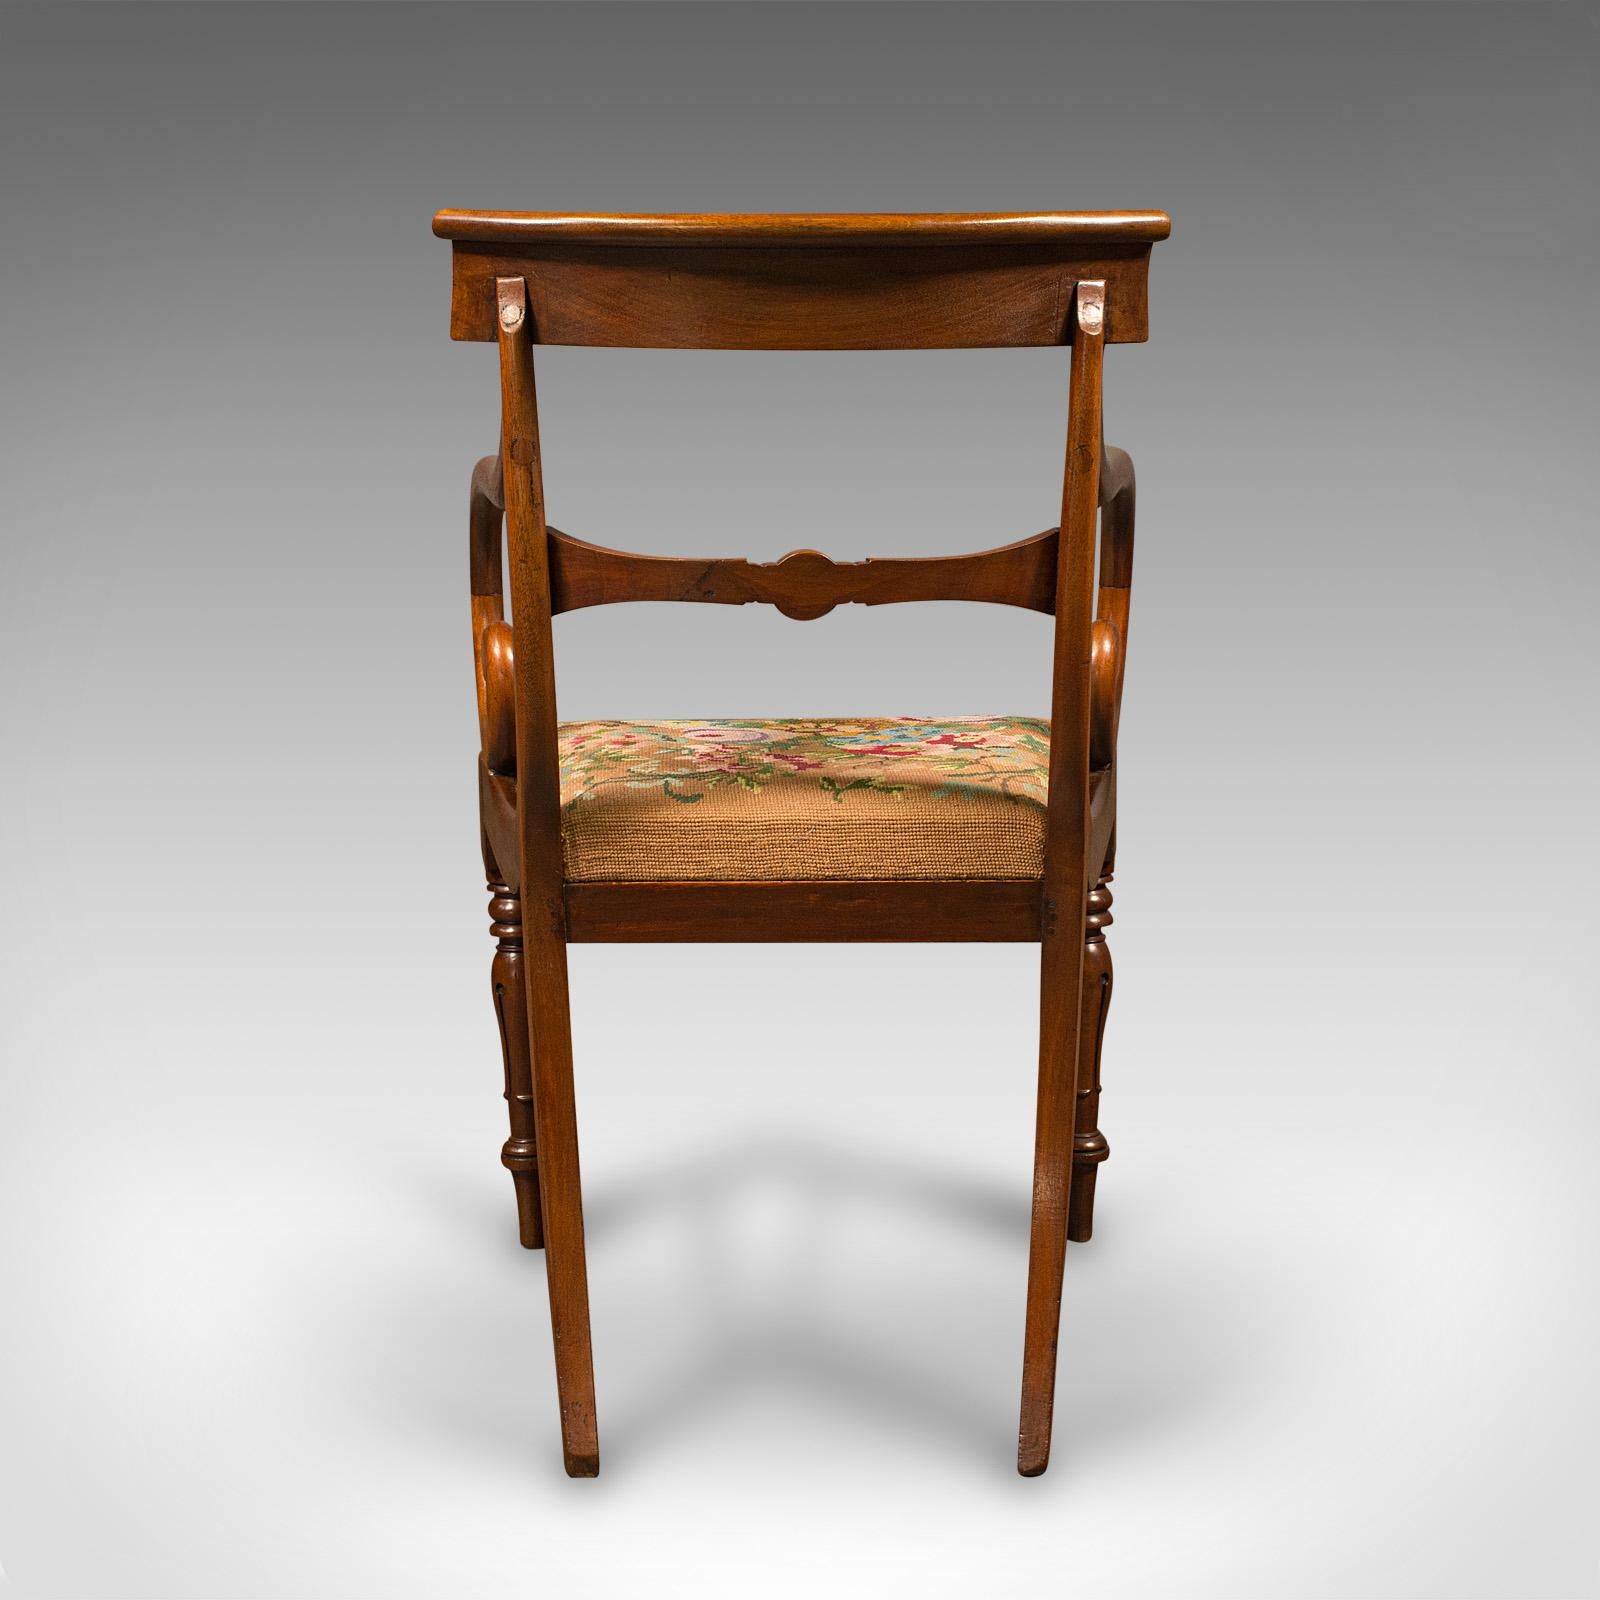 19th Century Antique Scroll Arm Chair, English, Armchair, Desk, Needlepoint, Regency, C.1830 For Sale